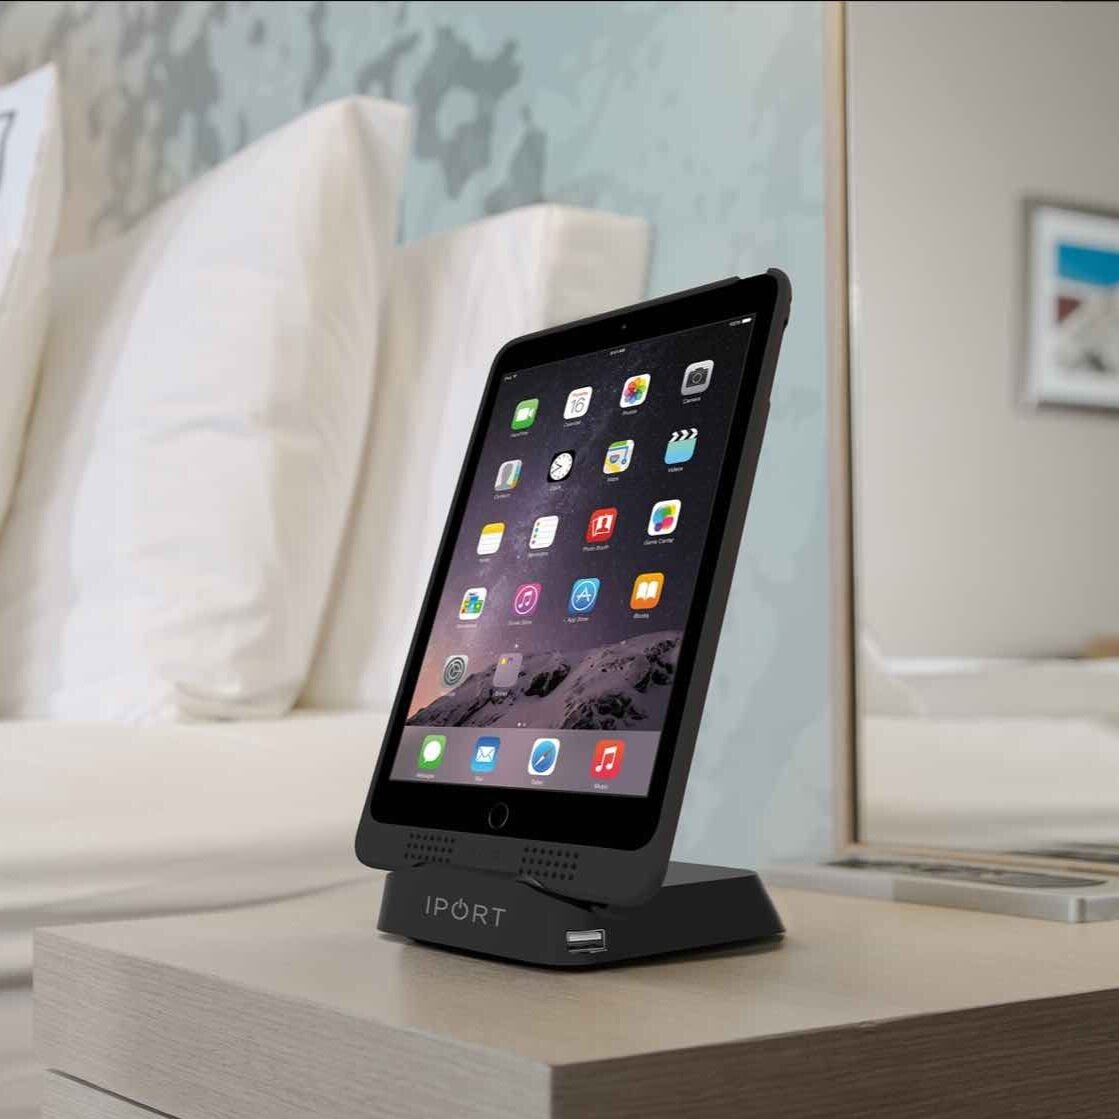 ipad stand holder with charger